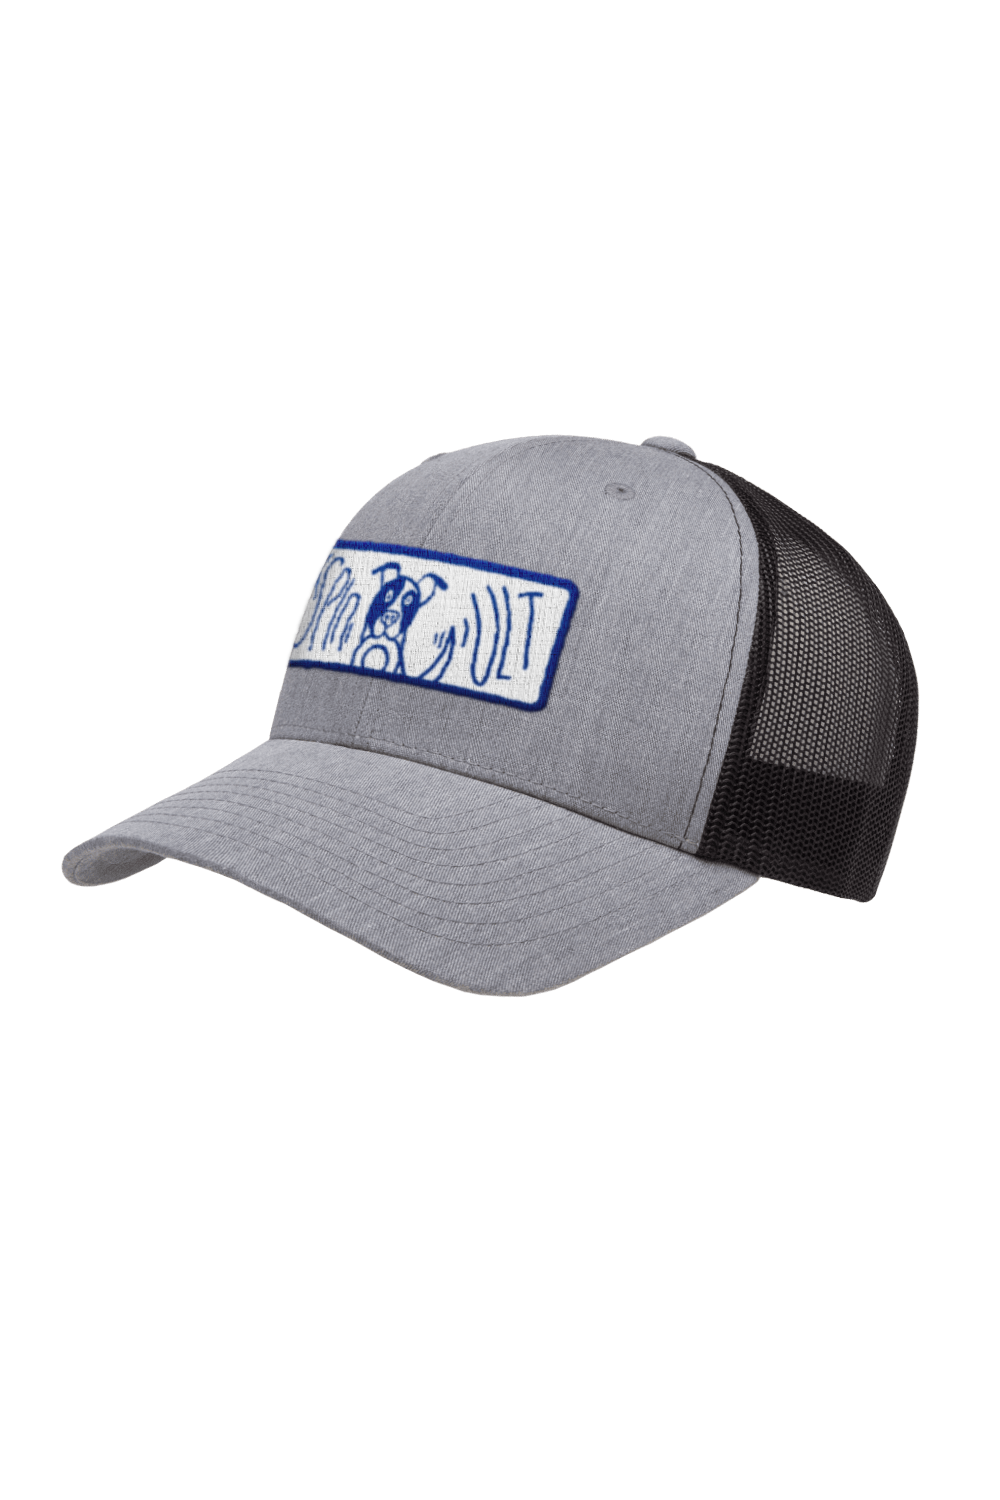 Ultimate Frisbee Hats - 5 Panel & More Hats